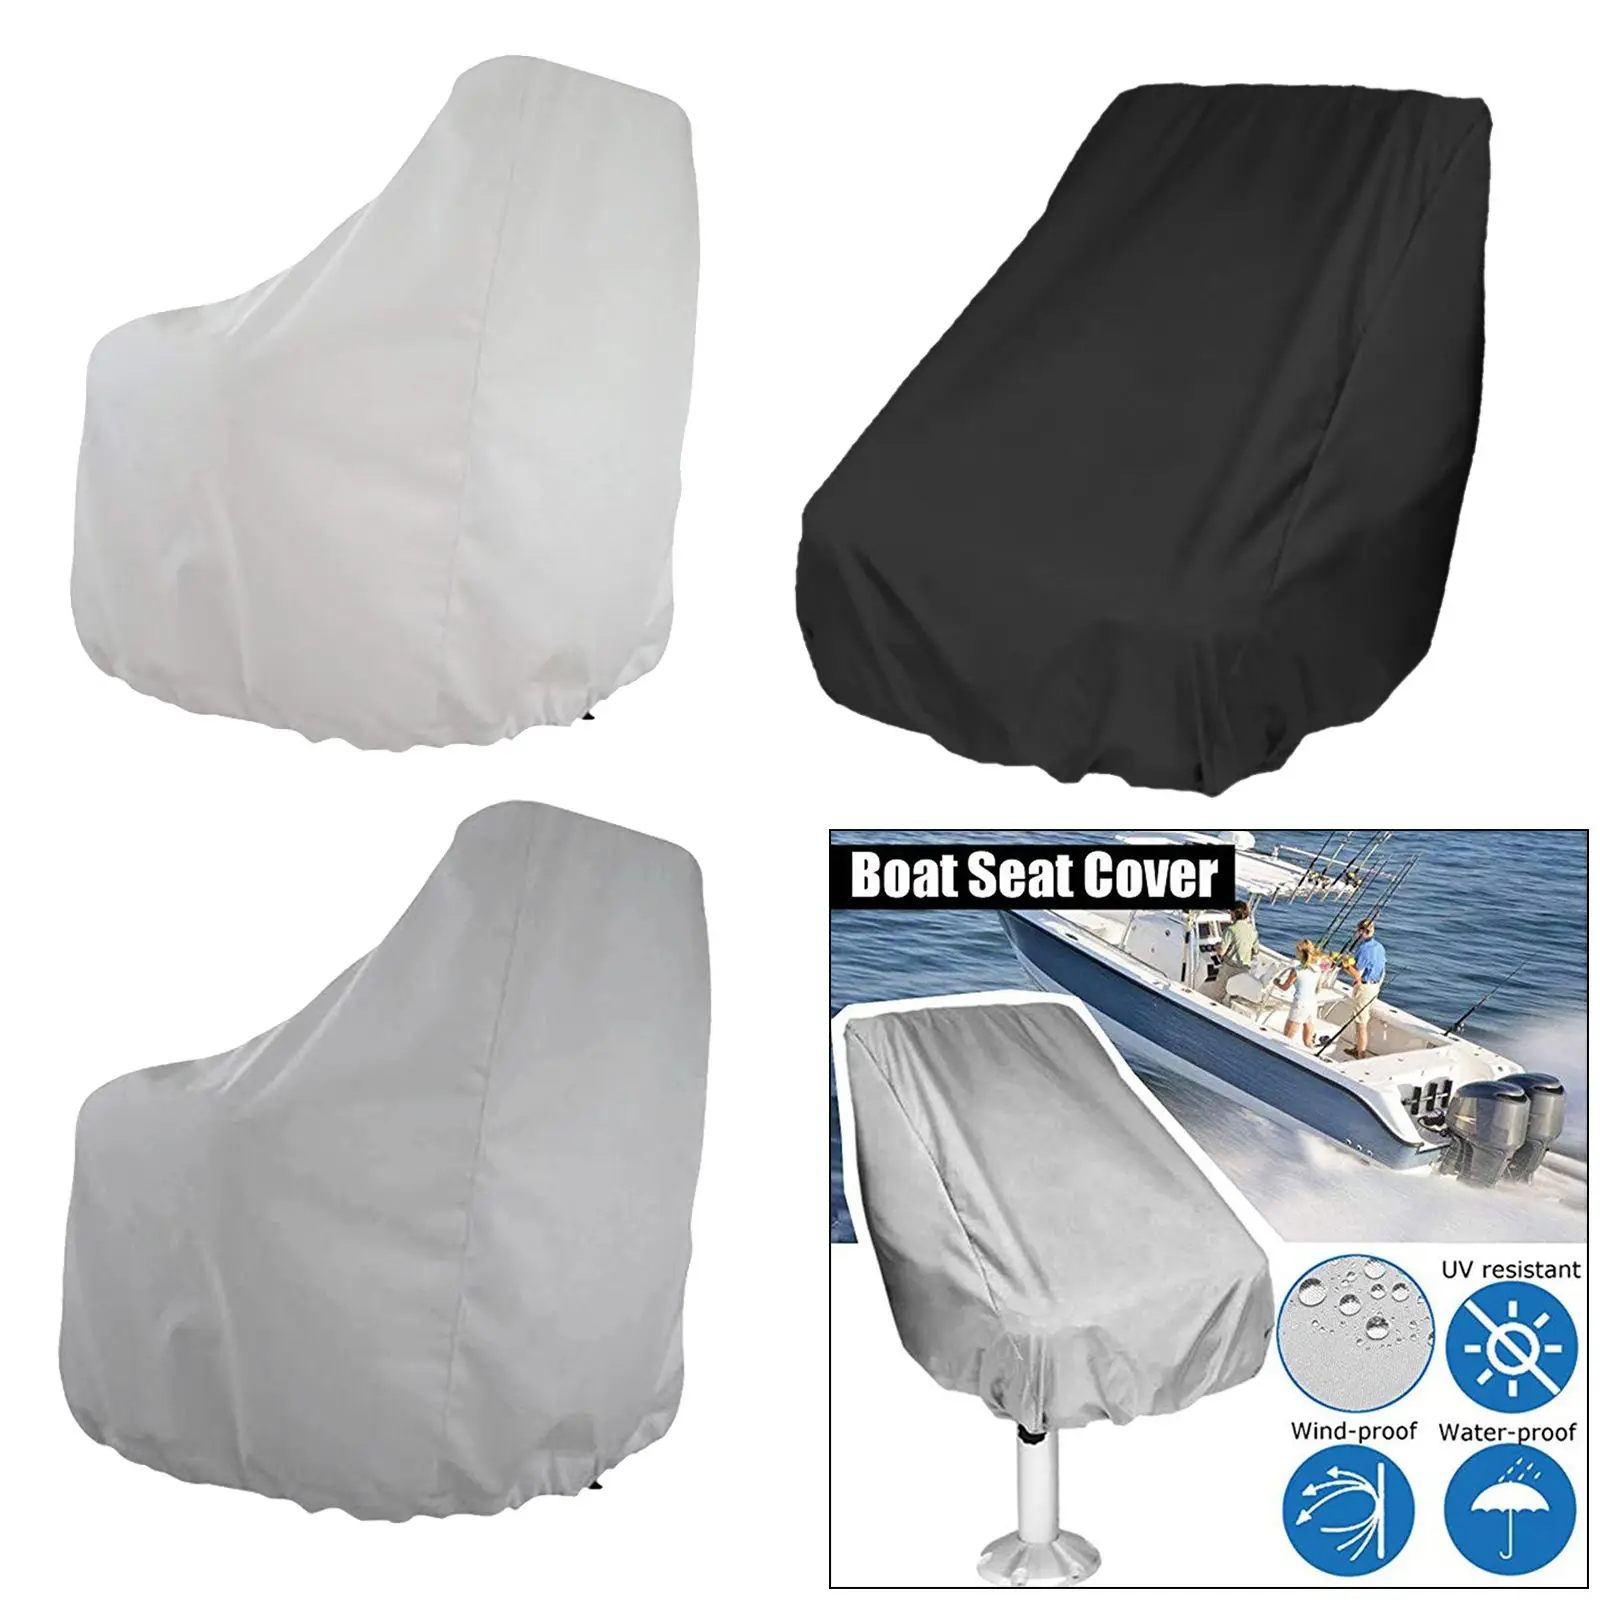 Boat Seat Cover Outdoor Foldable Ship Fishing Waterproof Dust Helmsman Captain Chair UV Resistant Yacht Furniture Protection images - 6